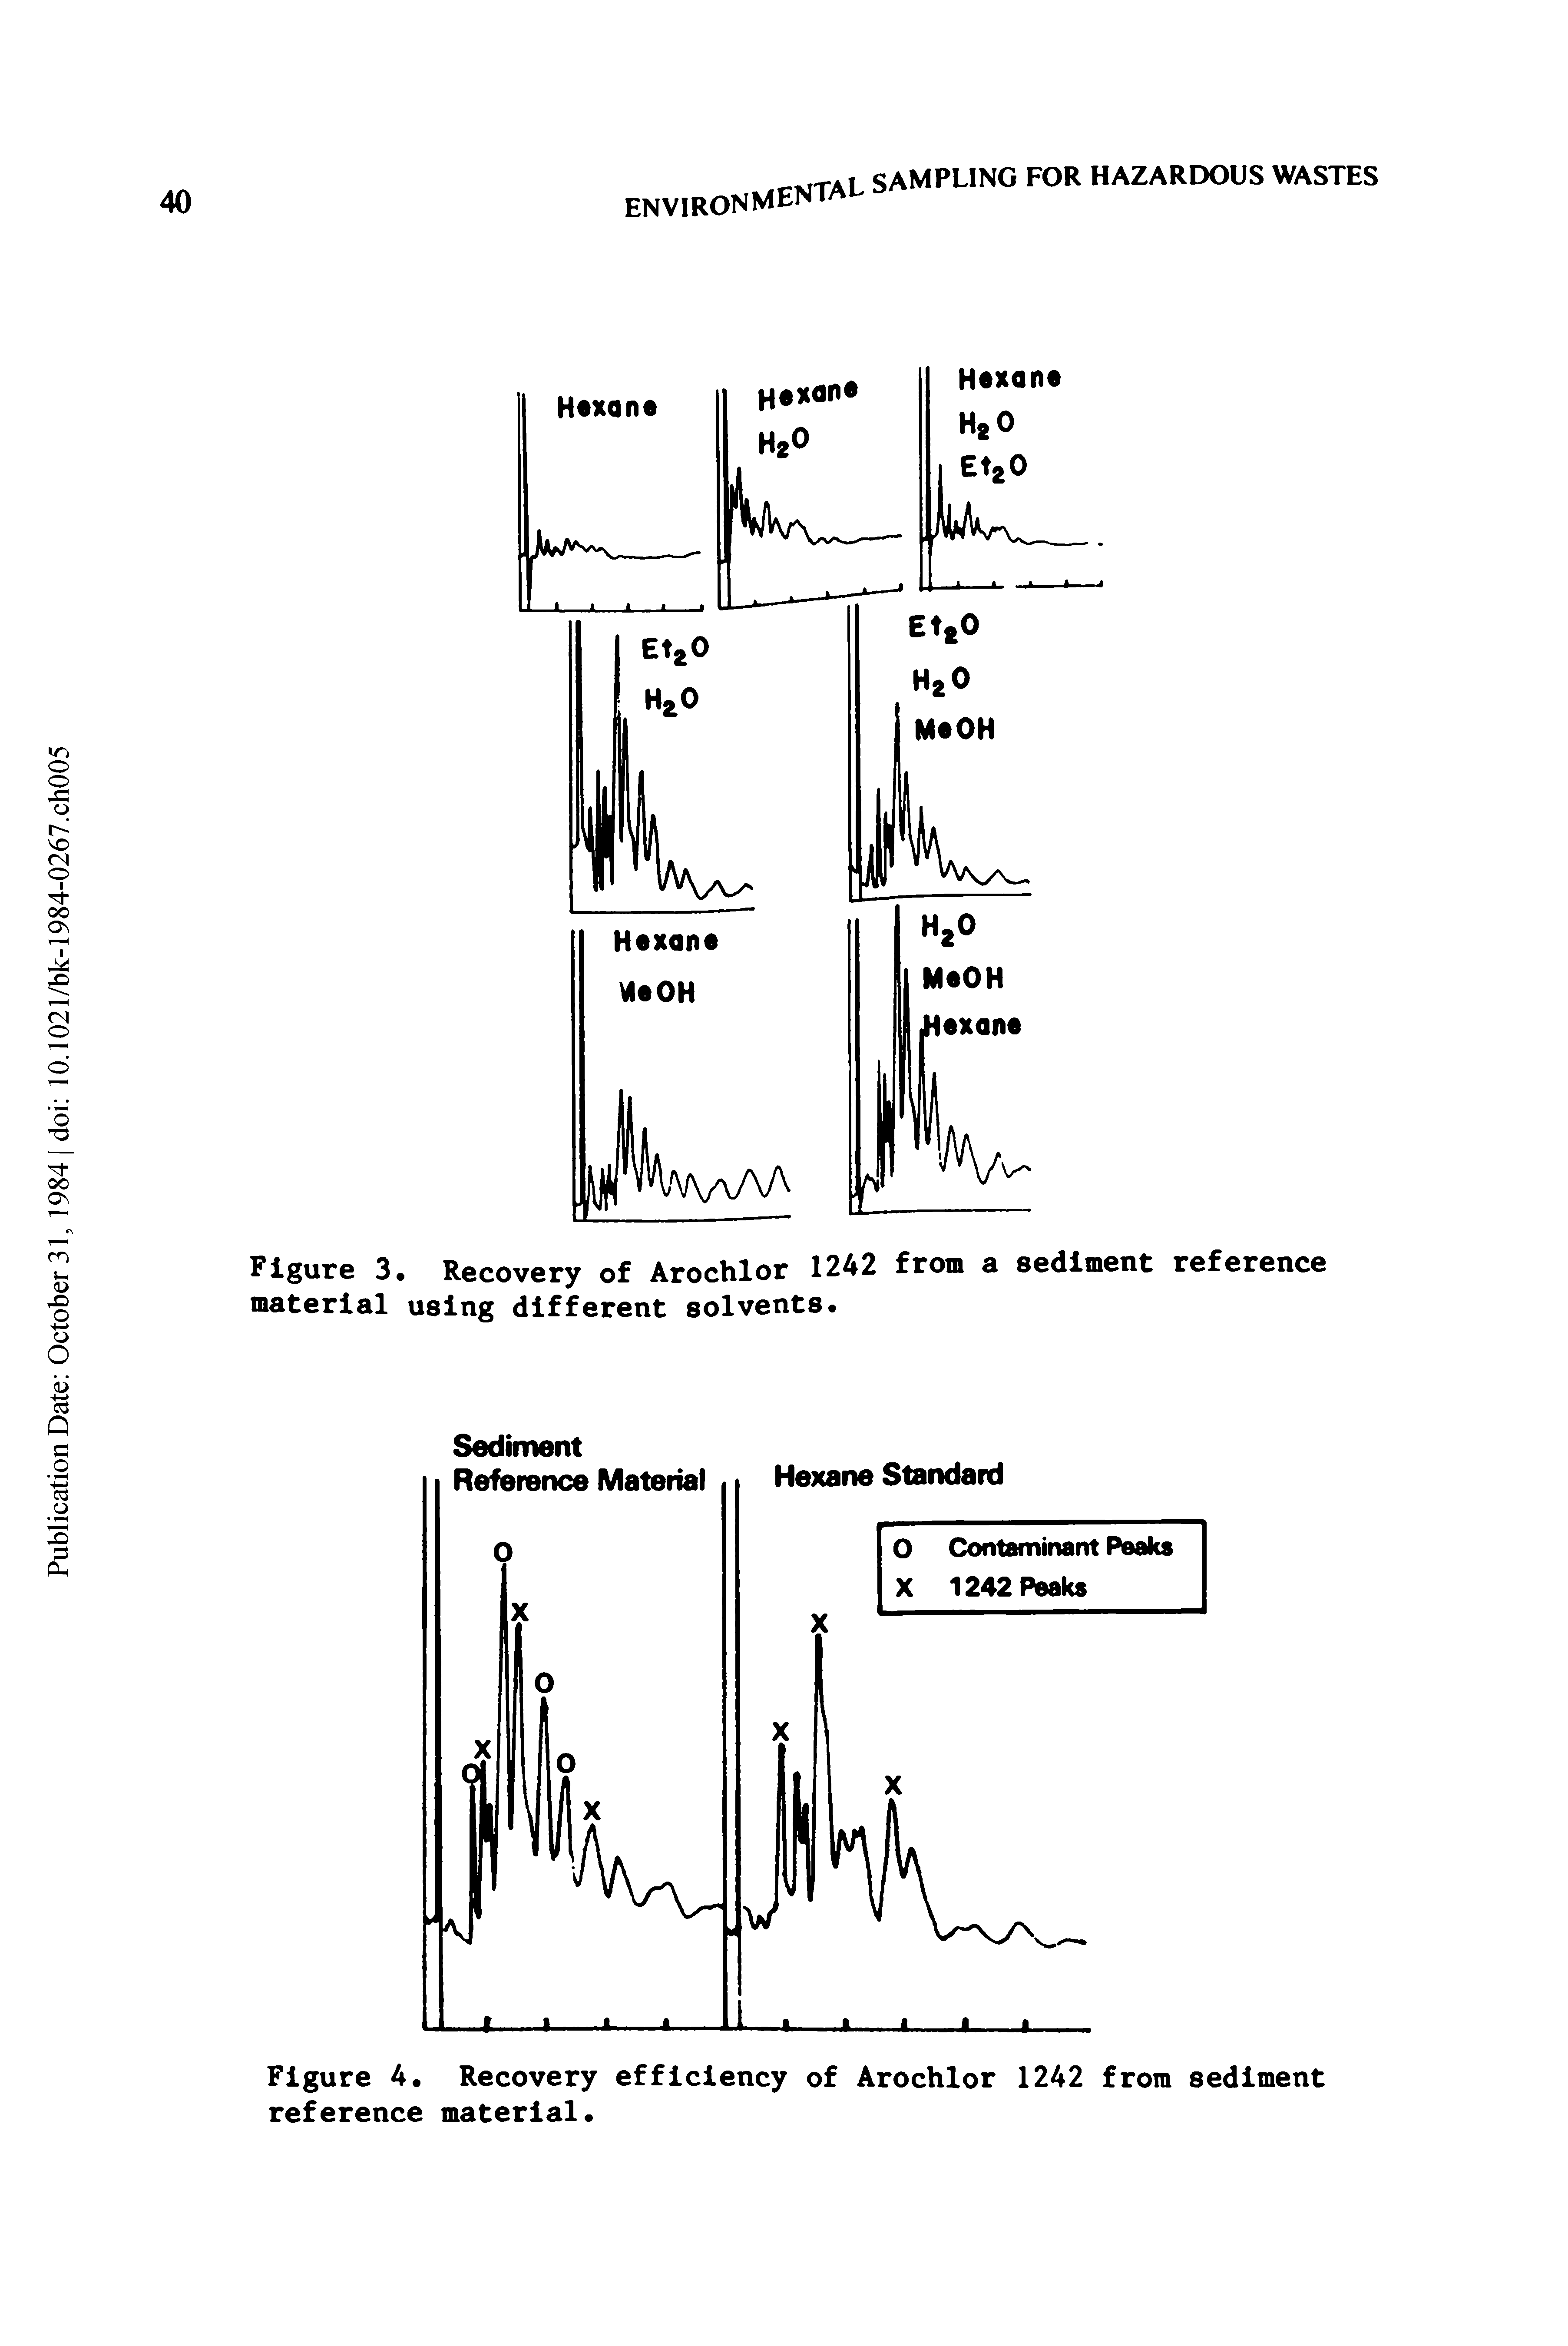 Figure 4. Recovery efficiency of Arochlor 1242 from sediment reference material.